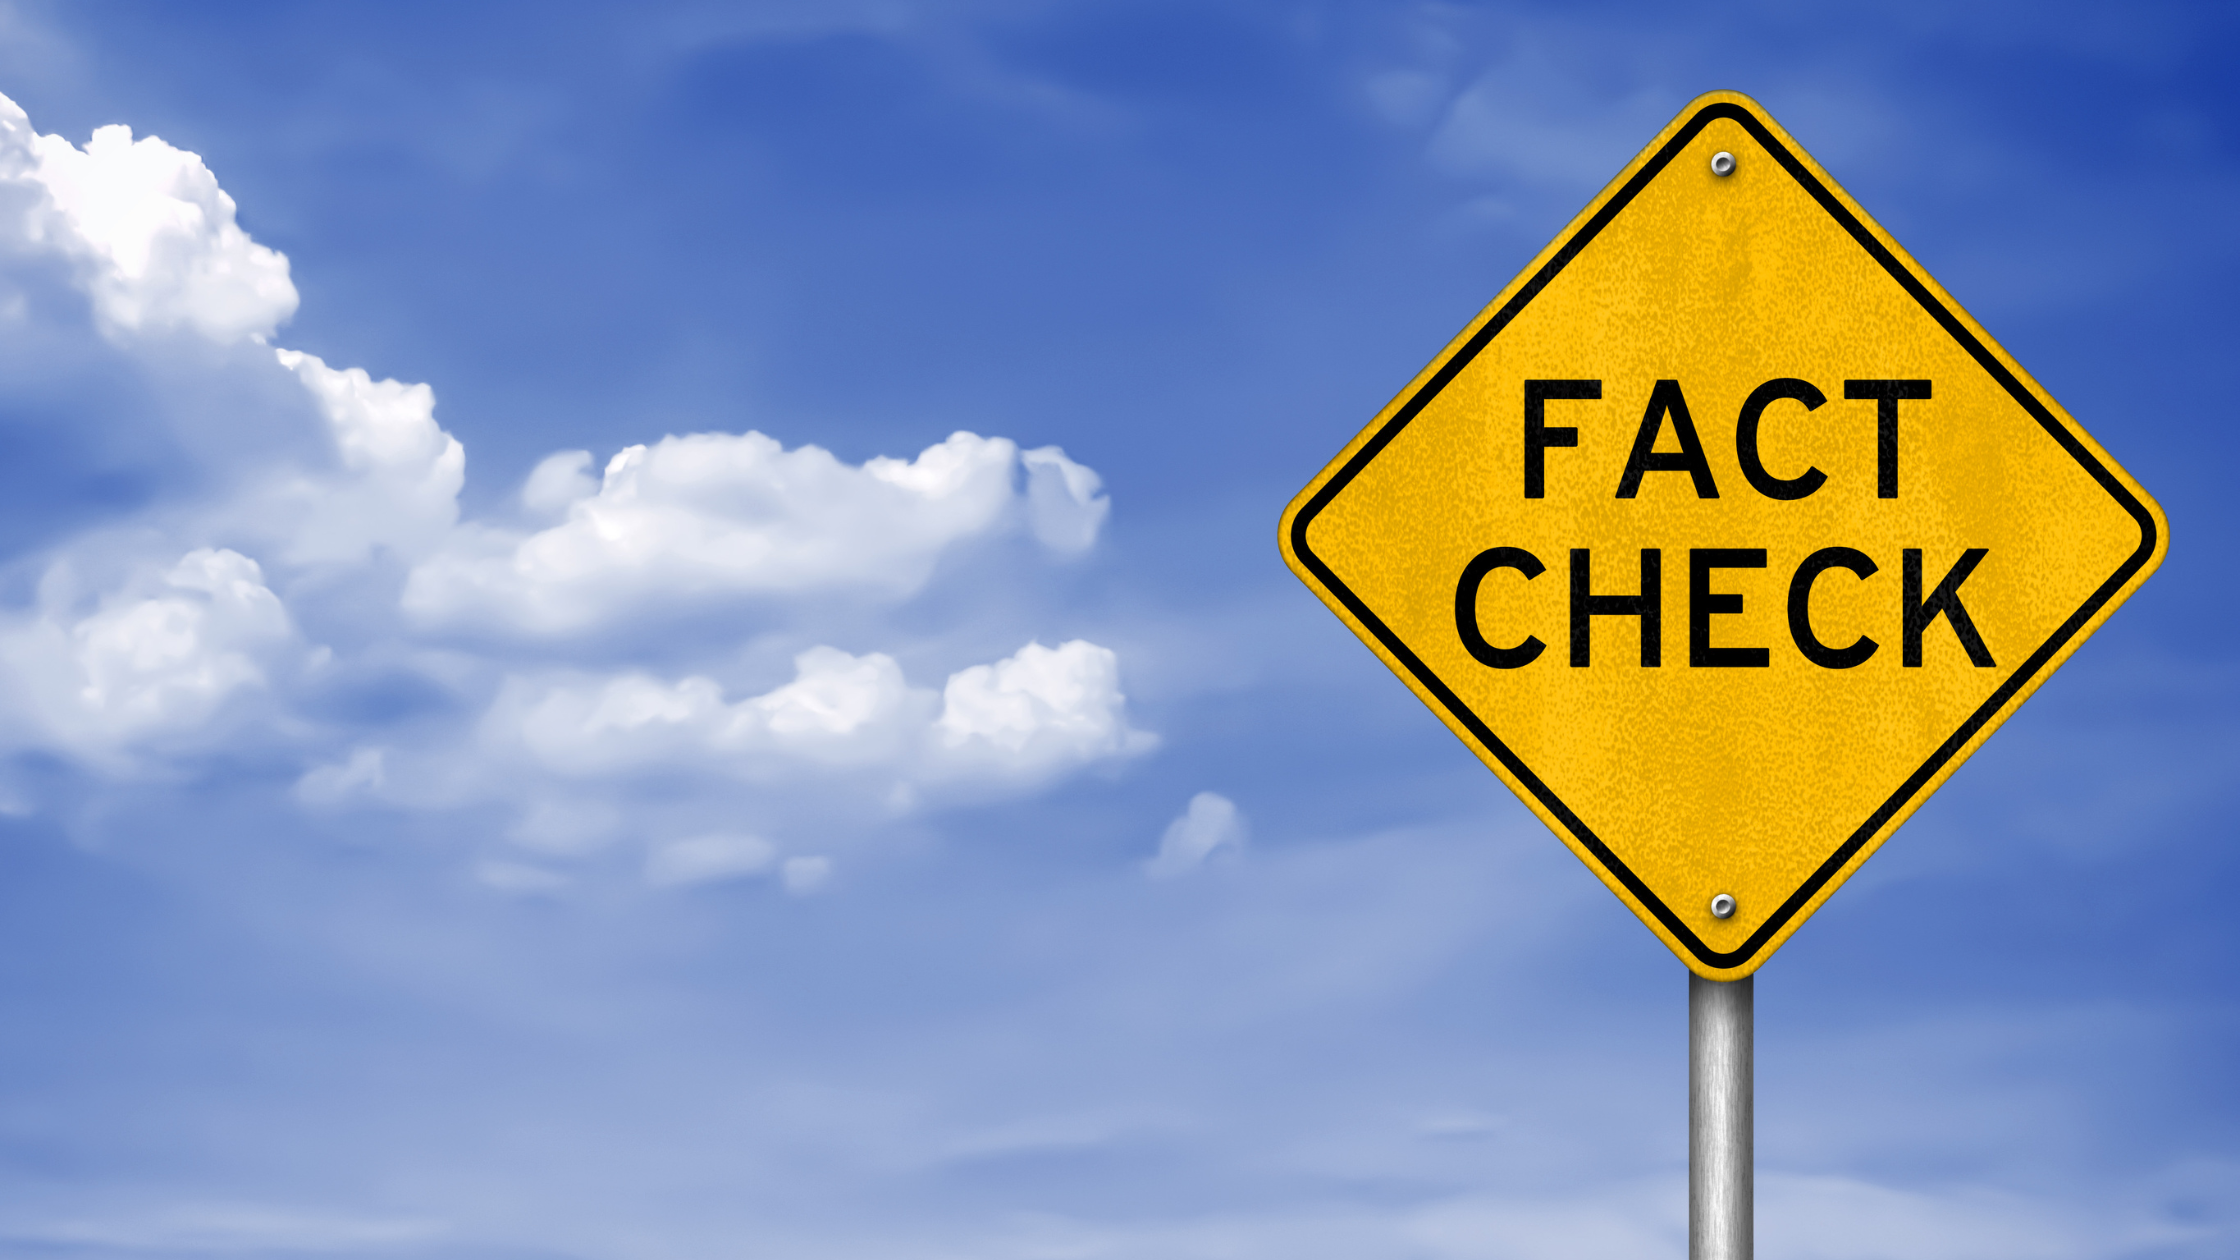 Fact Check road sign, blue sky with clouds background